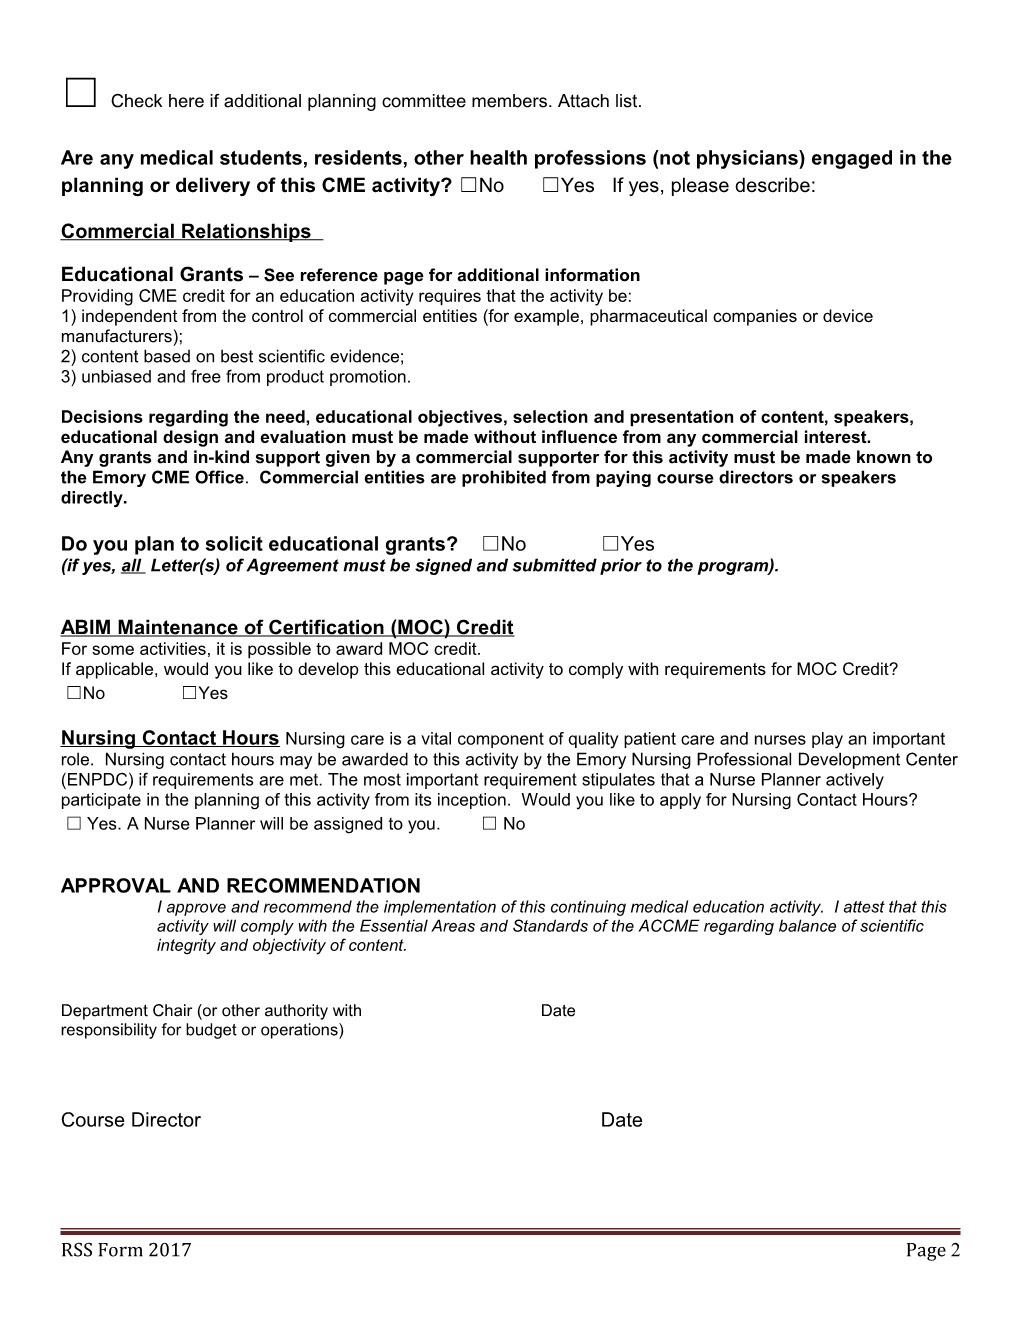 Cme Activity Planning and Approval Form